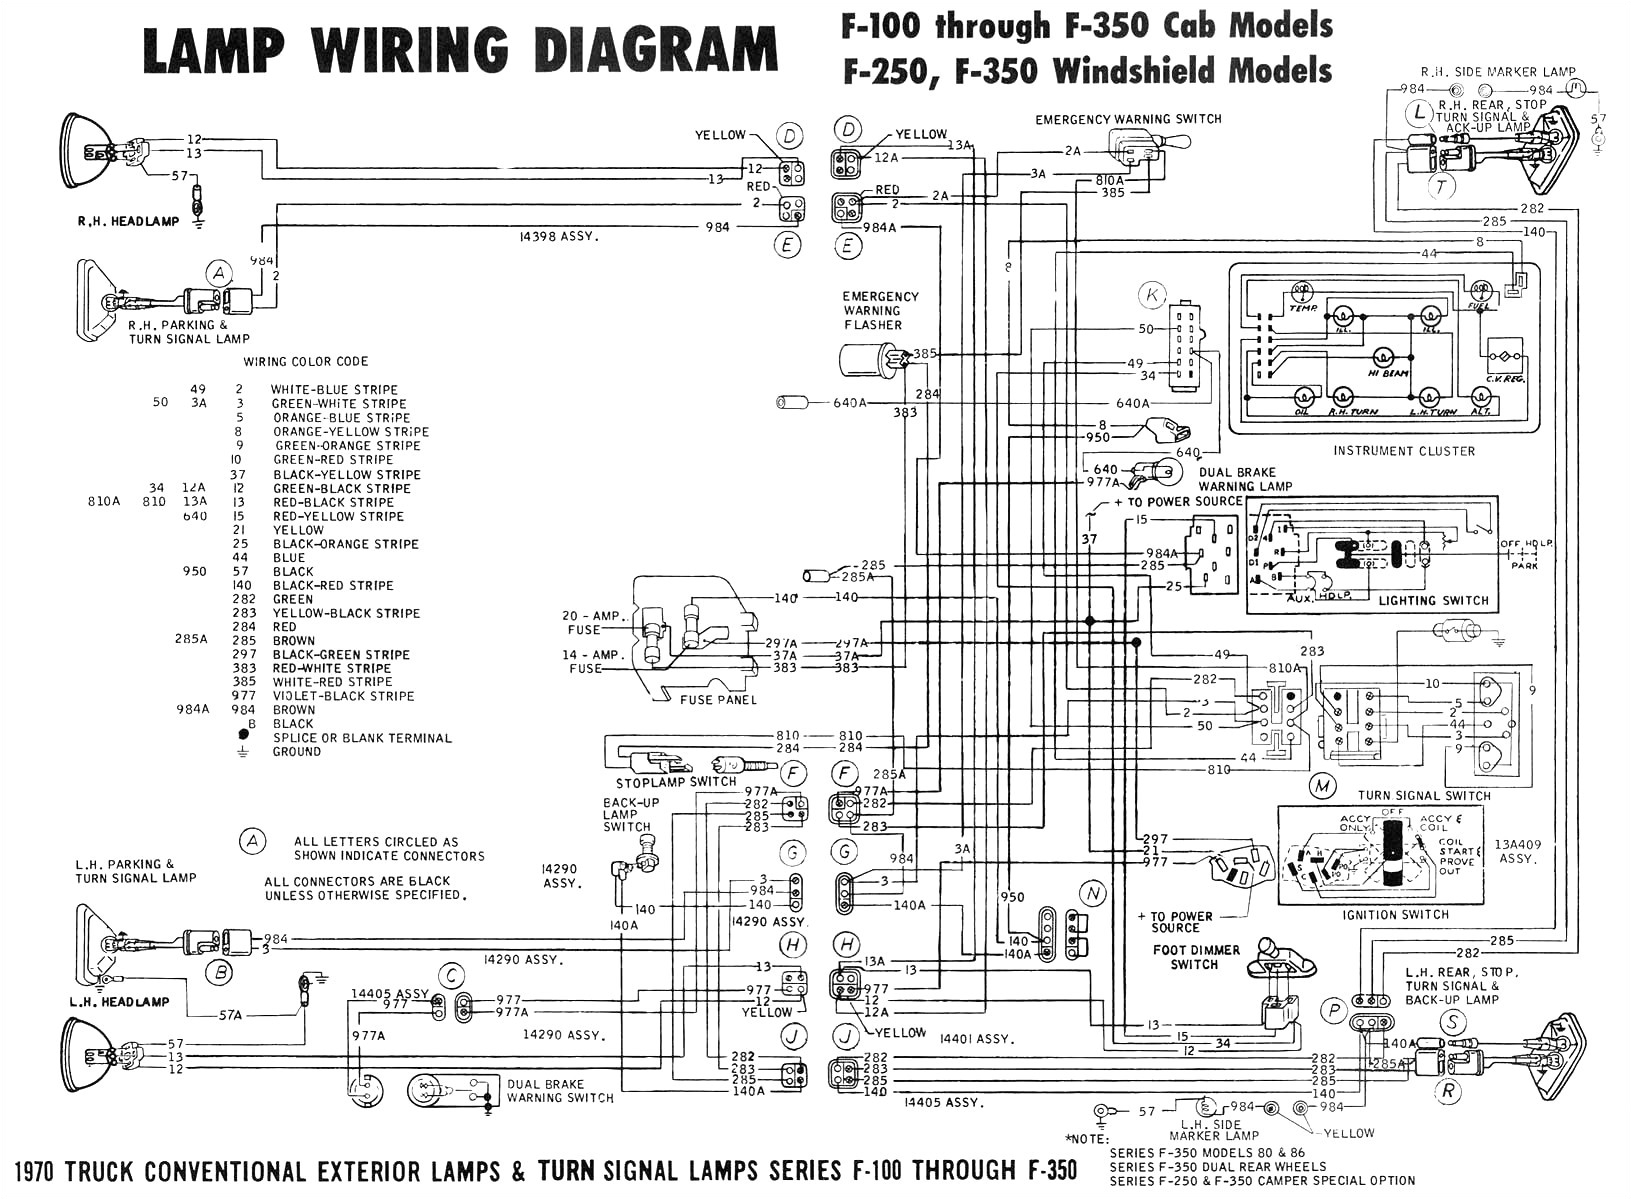 93 ford e 250 wiring diagram wiring diagram name light switch wiring diagram 1998 ford e250